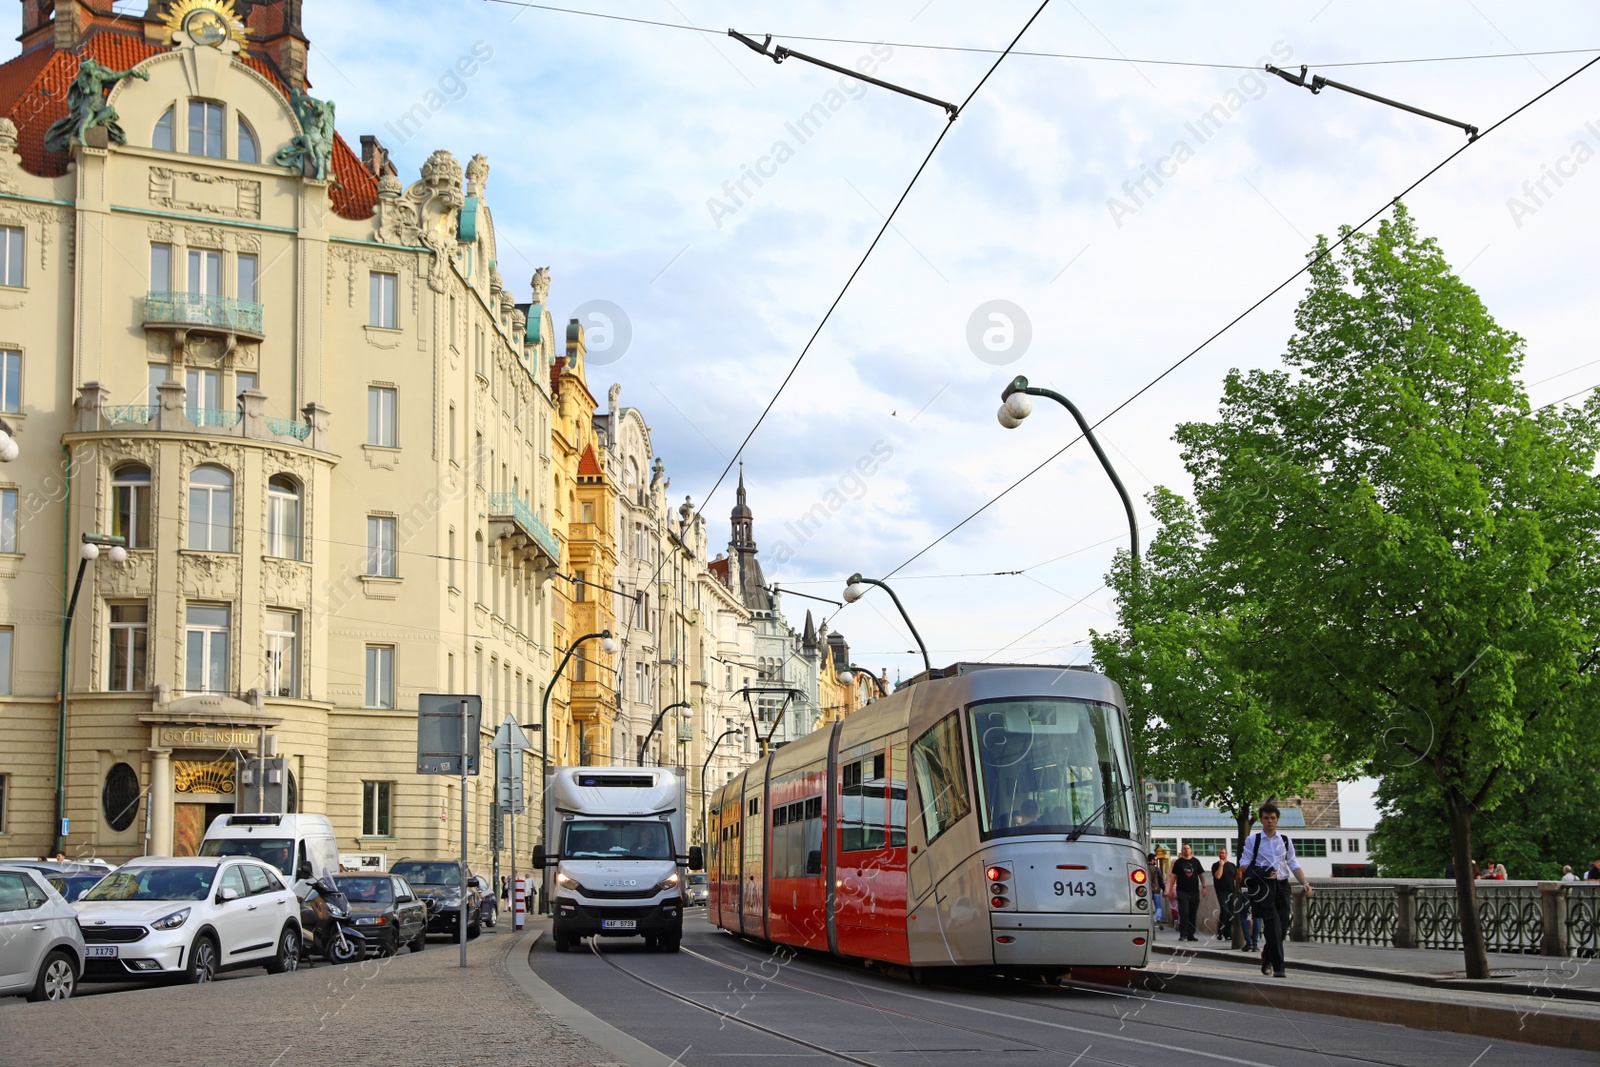 Photo of PRAGUE, CZECH REPUBLIC - APRIL 25, 2019: City street with beautiful buildings and road traffic